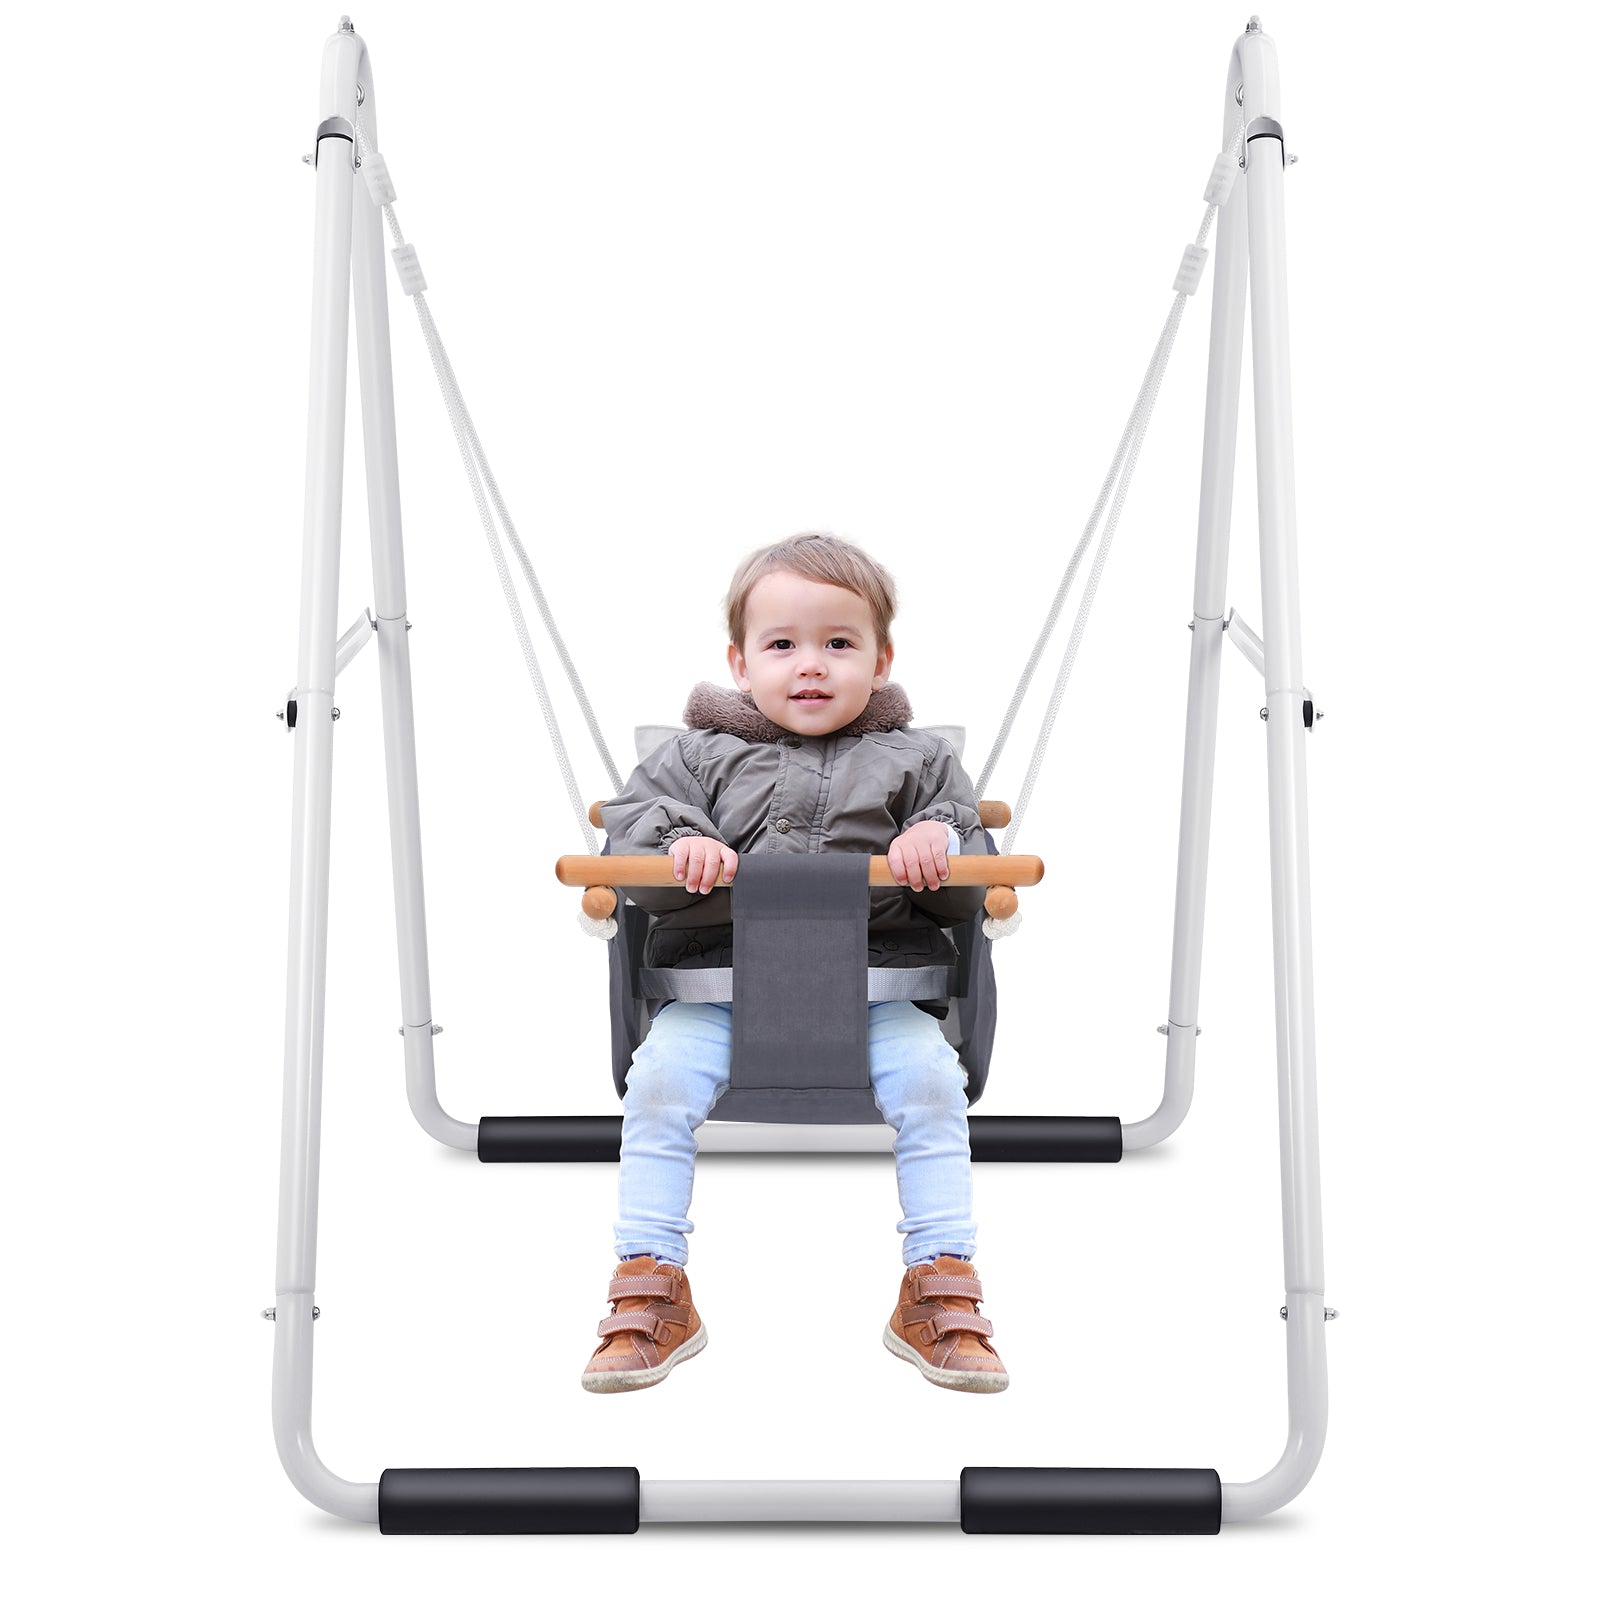 Toddler Swing with Foldable Stand, Baby Swing Set for Indoor Outdoor